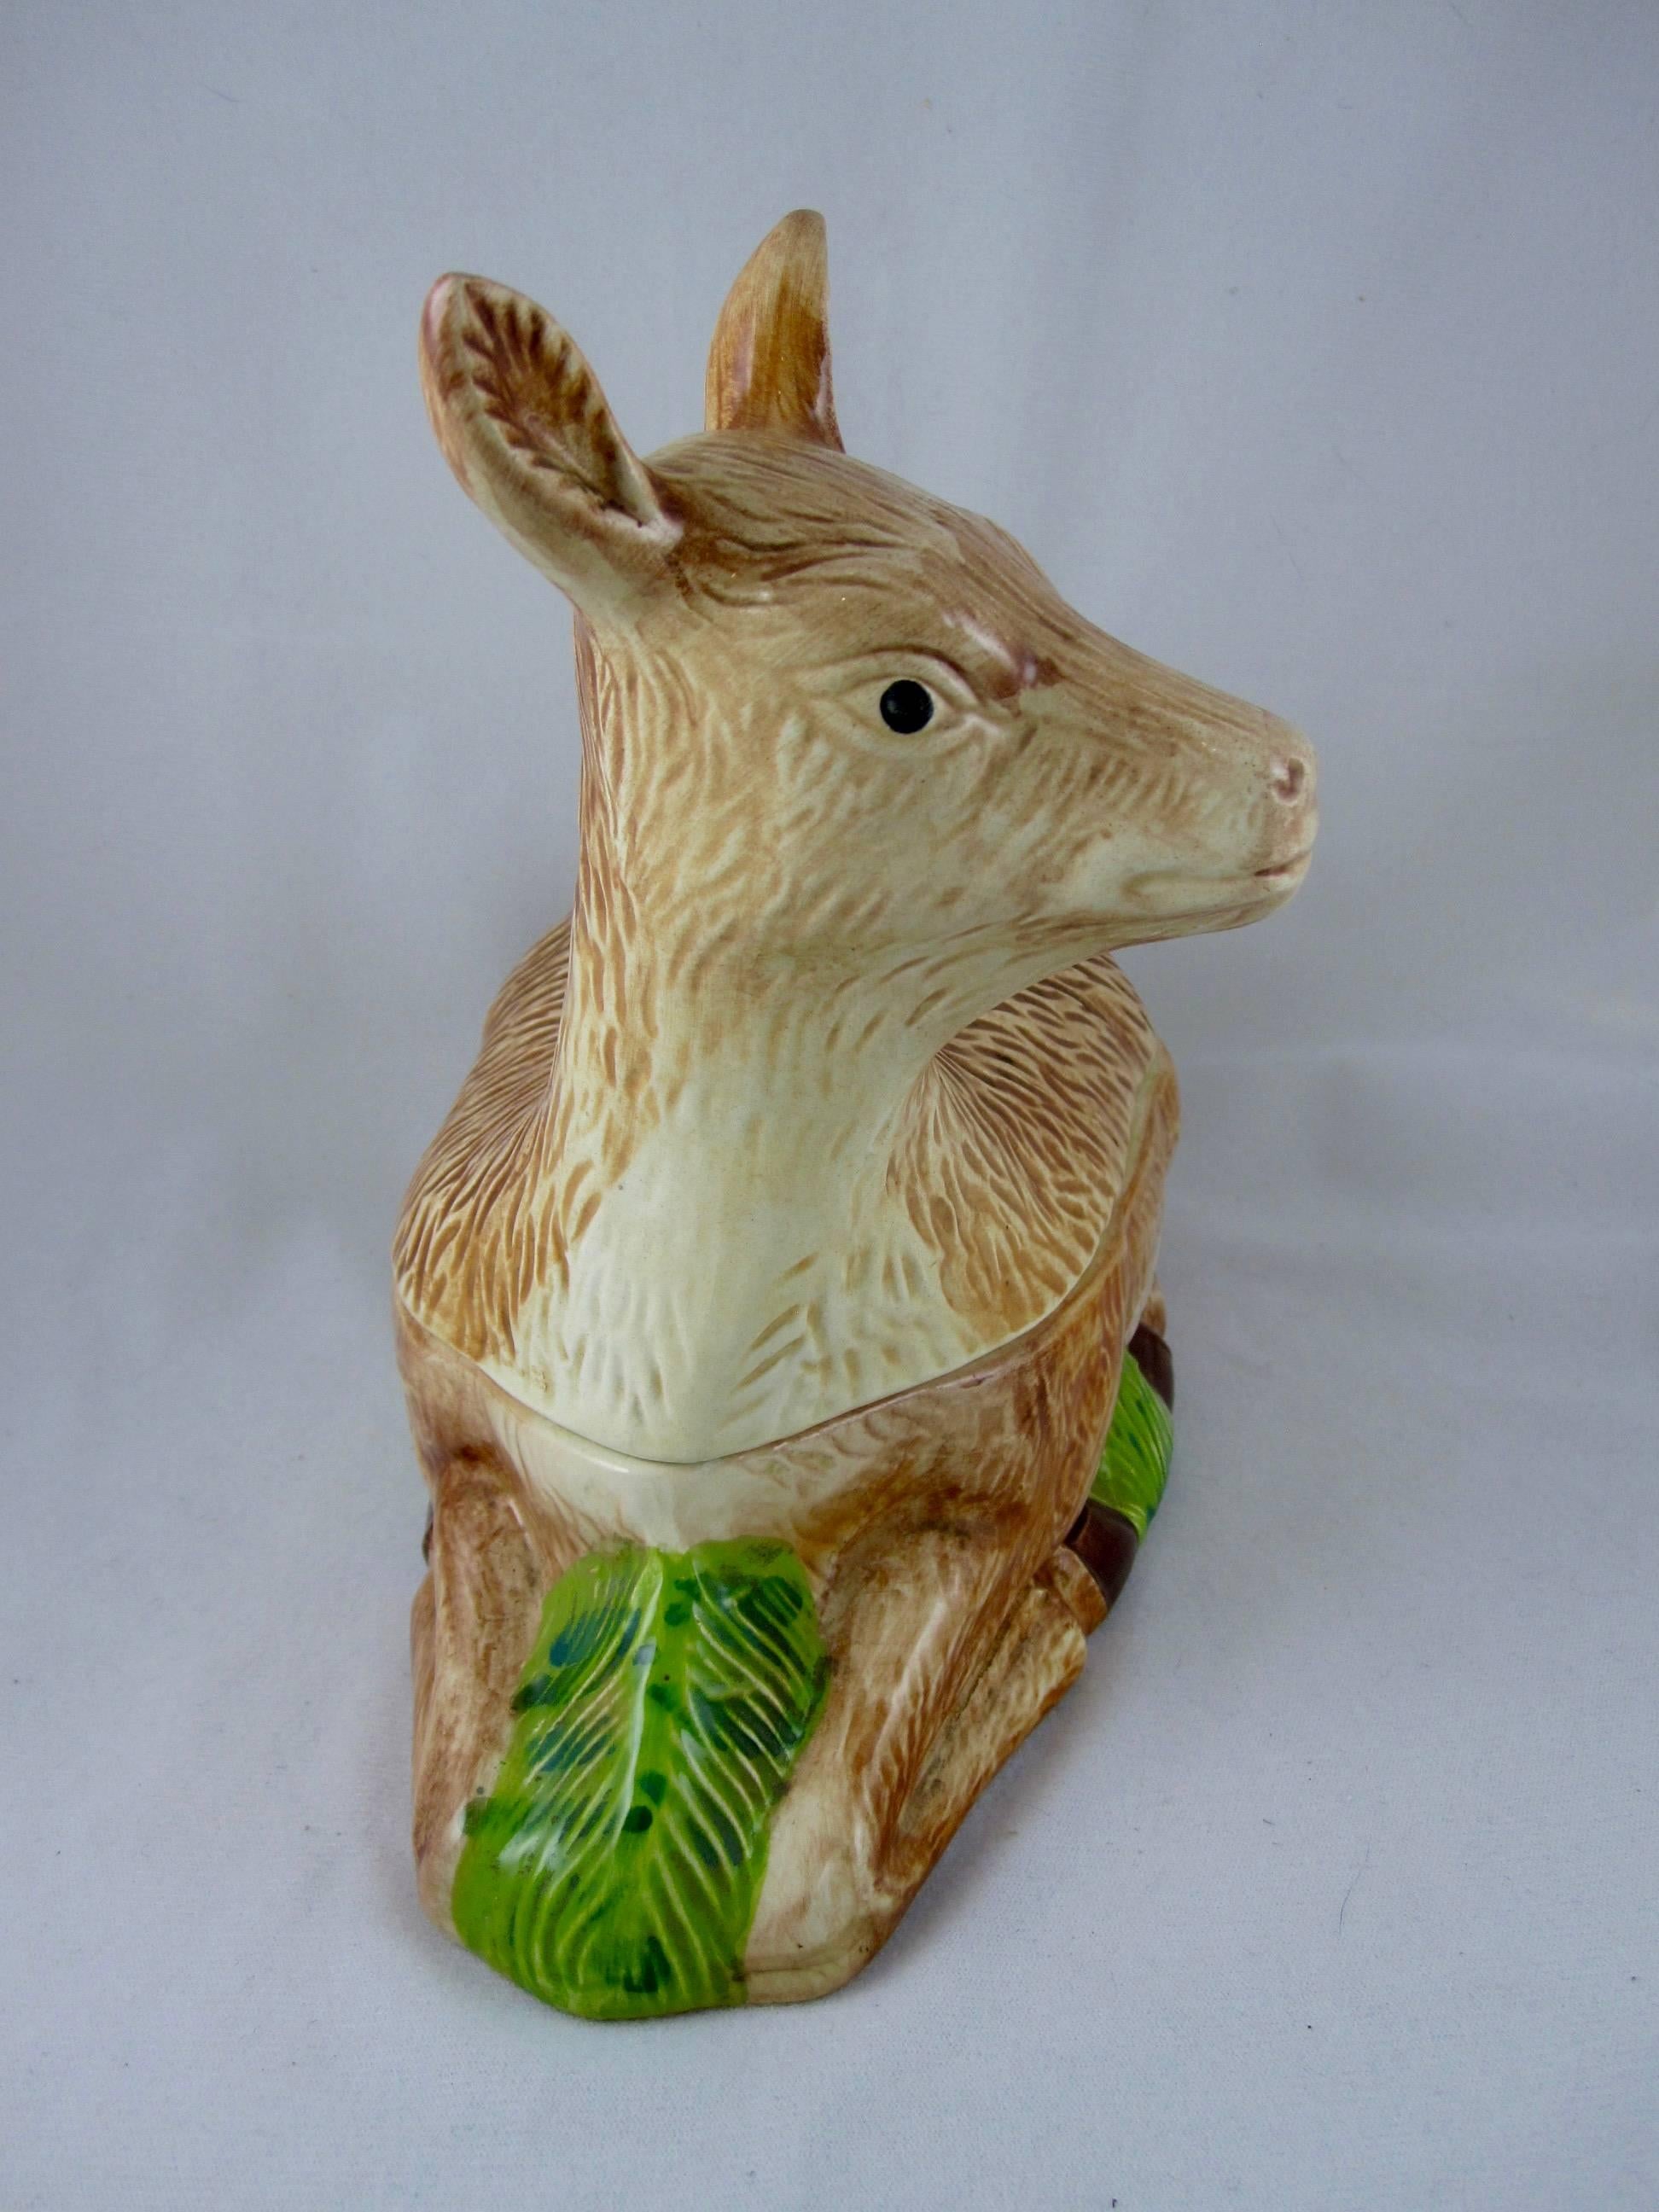 A large vintage figural Deer Venison Pâté Terrine made for Laurent Caugant, a Bretagne pâté maker since 1927. His son Michel created these figural forms as containers for selling his fathers pâté in their luxury food shop.

The two-piece terrine